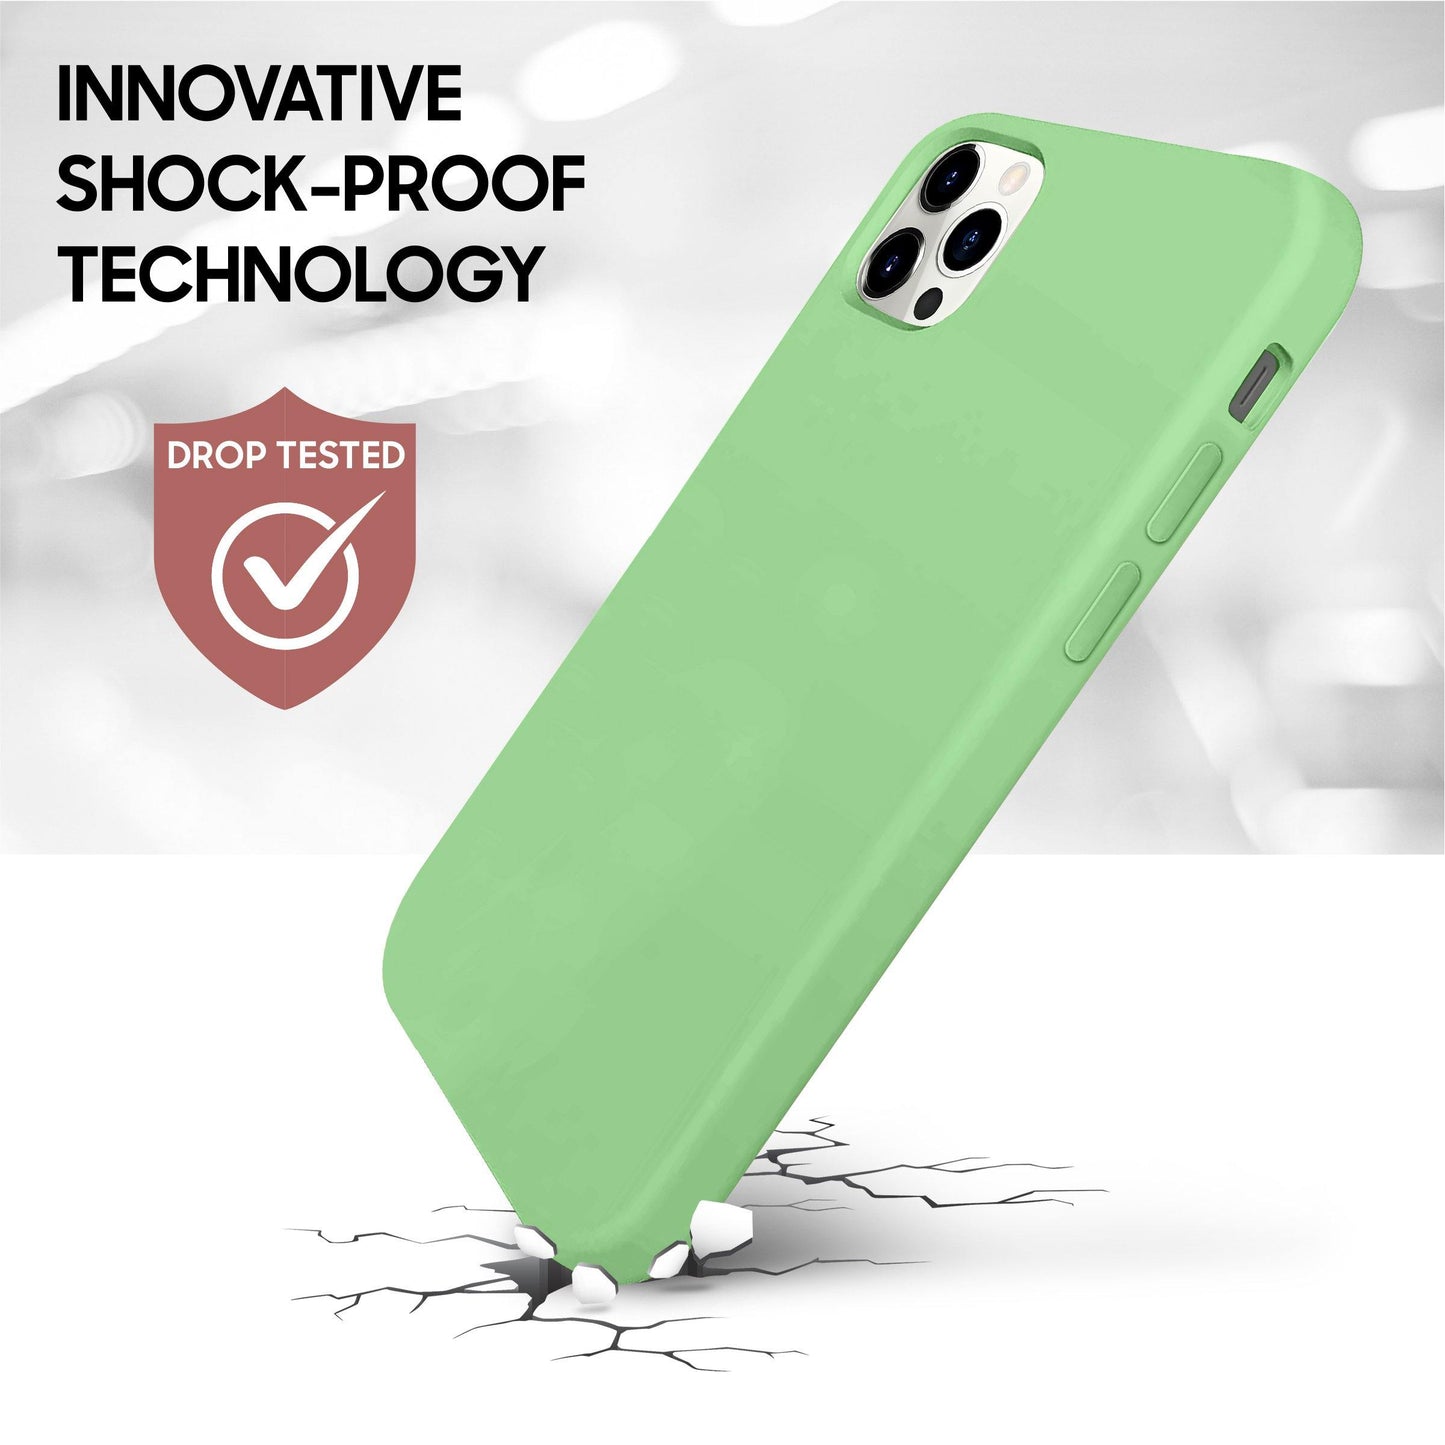 Silicone Case for iPhone 12 / 12 Pro 6.1-inch, Slim Fit Shockproof Protective Rubber Phone Cover - Case Yard USA